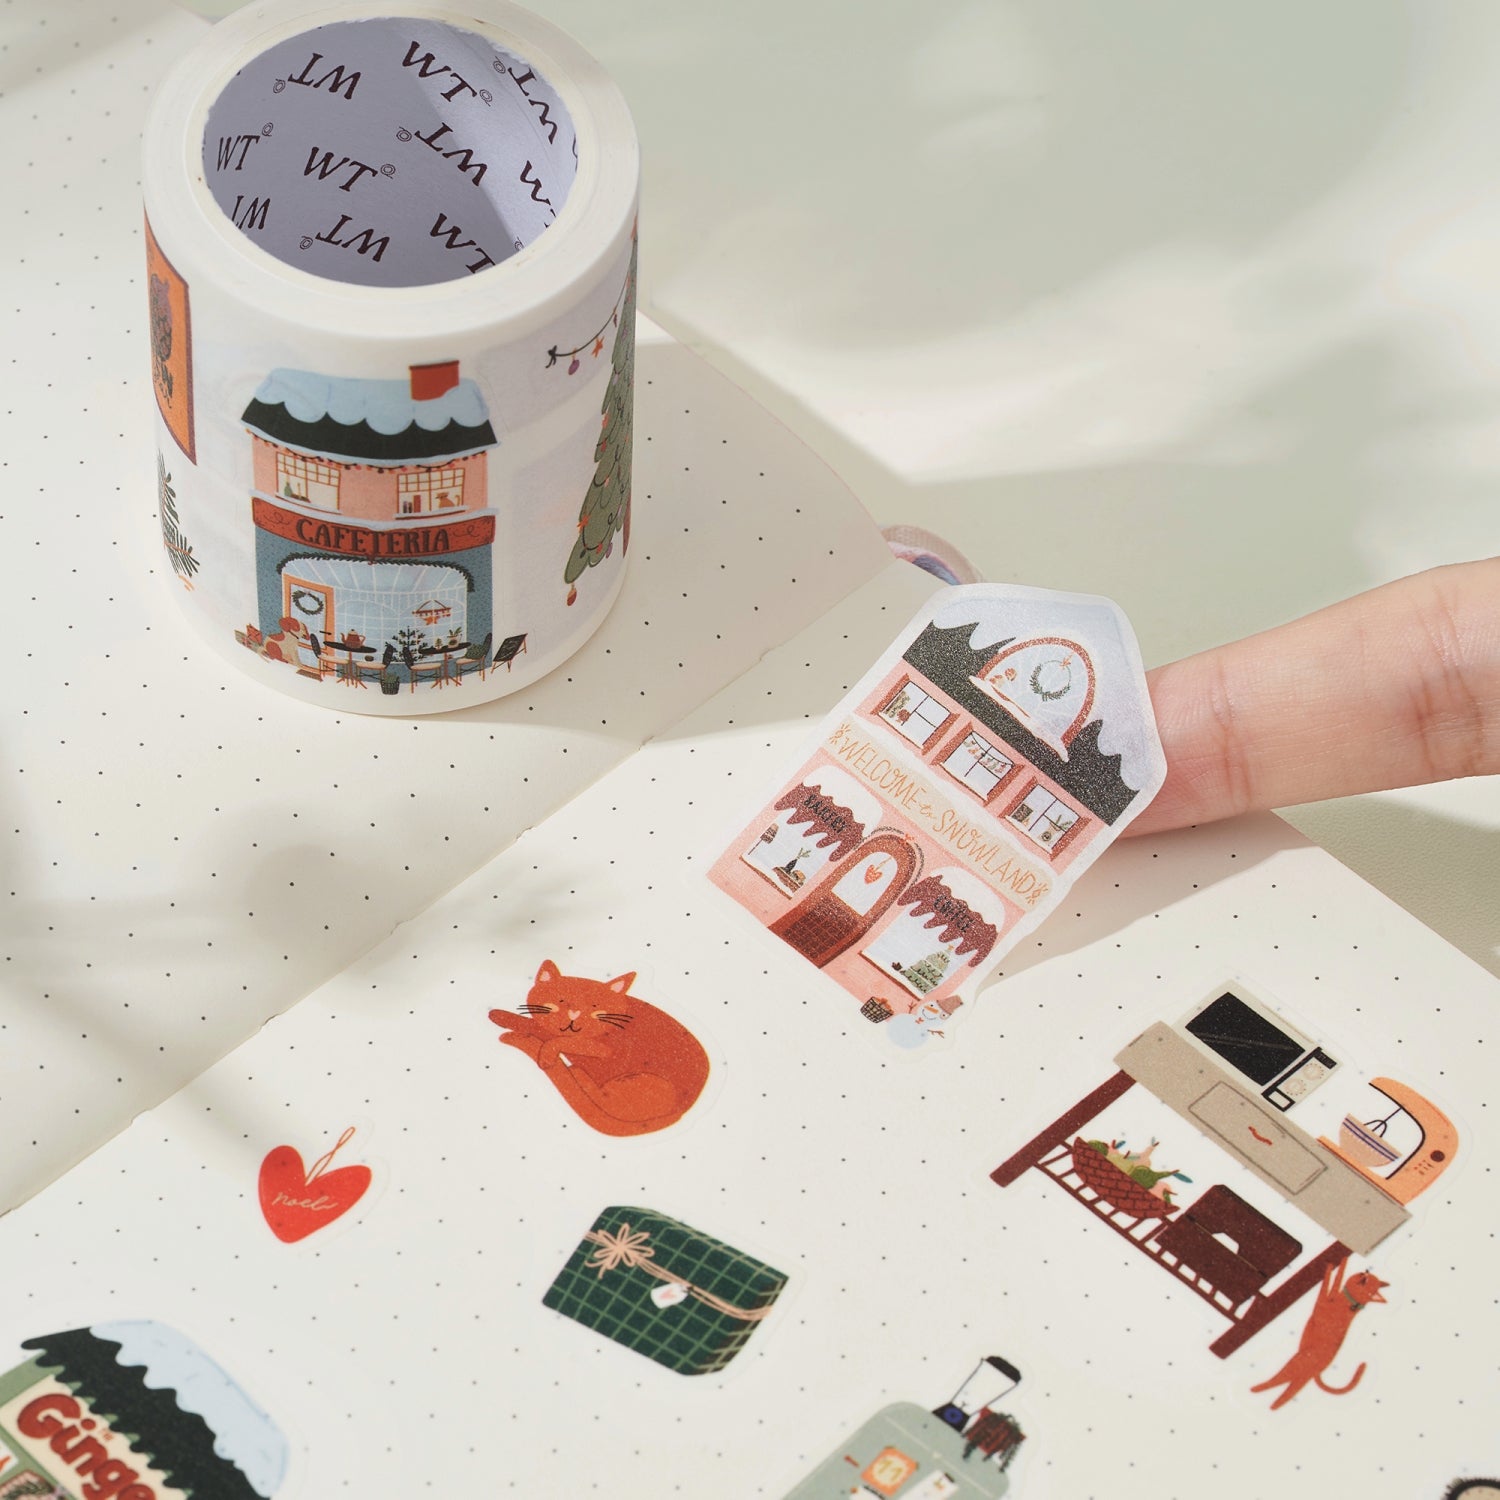 Bella Blvd Home Sweet Home Oh My Heart Washi Tape